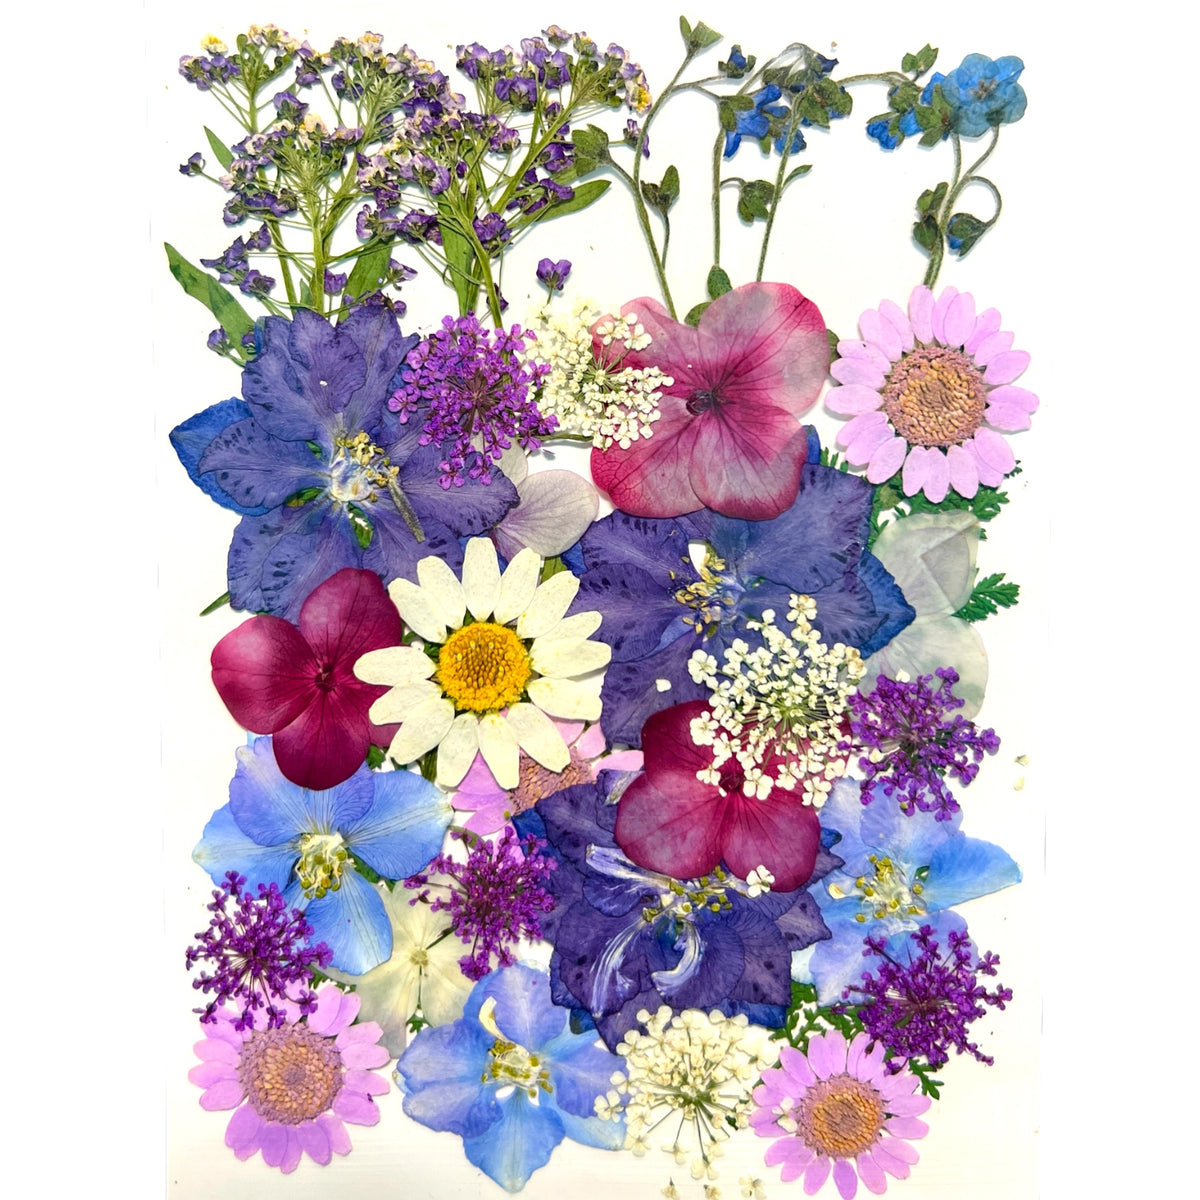 Violet Chemistry Multi-colored Variety of Dried Pressed Real Natural Flowers For Epoxy &amp; UV Resin Art